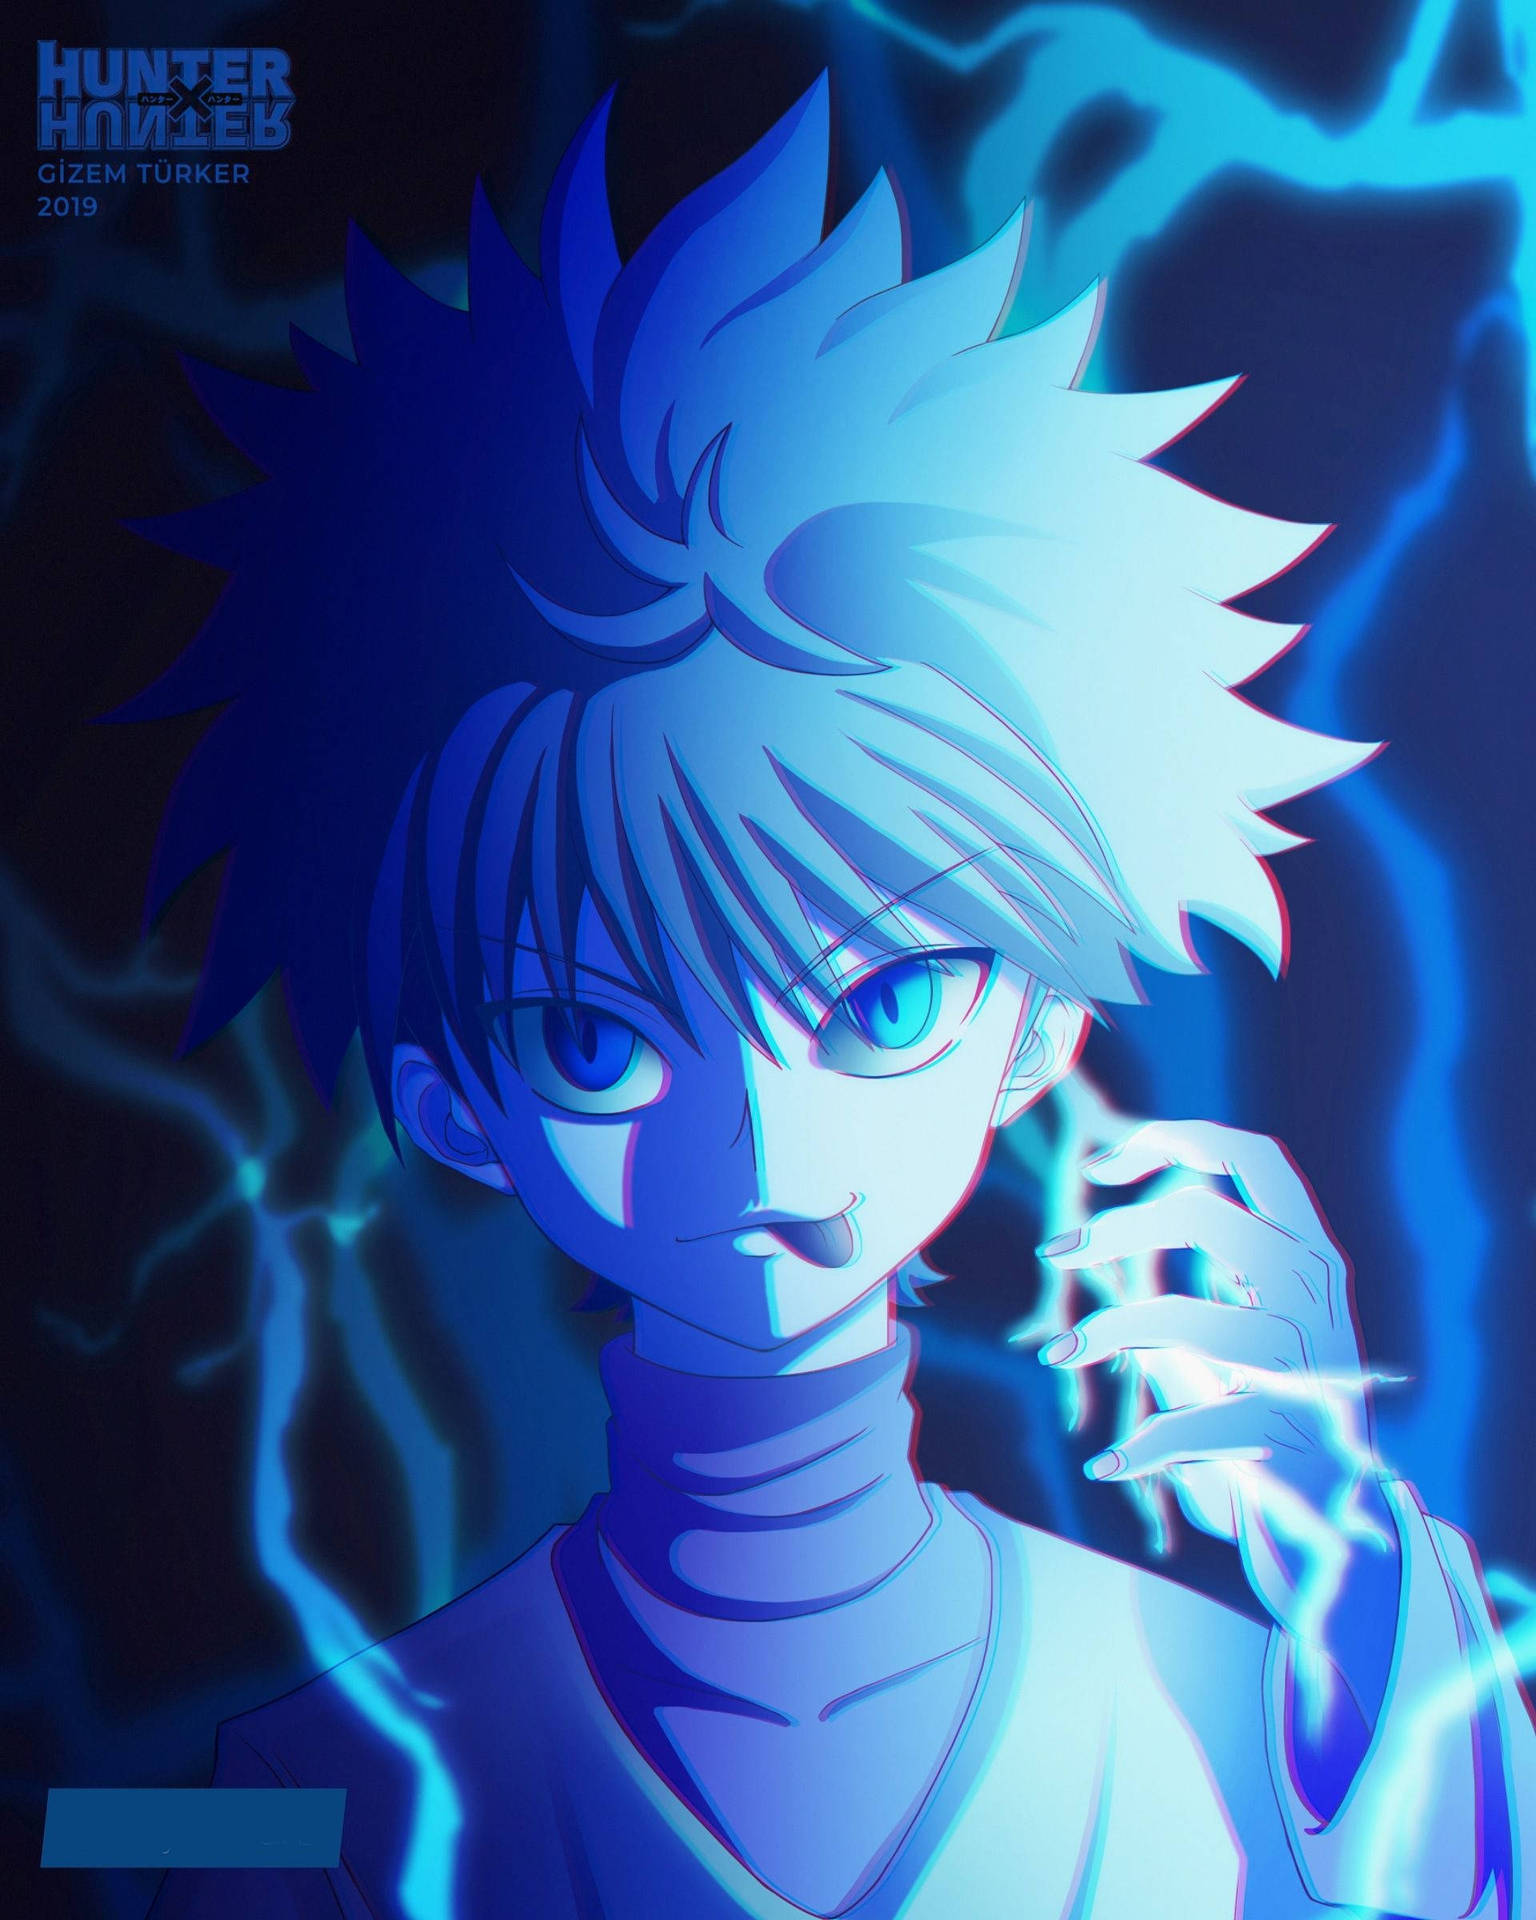 Cool Killua In A Powerful Stance Background